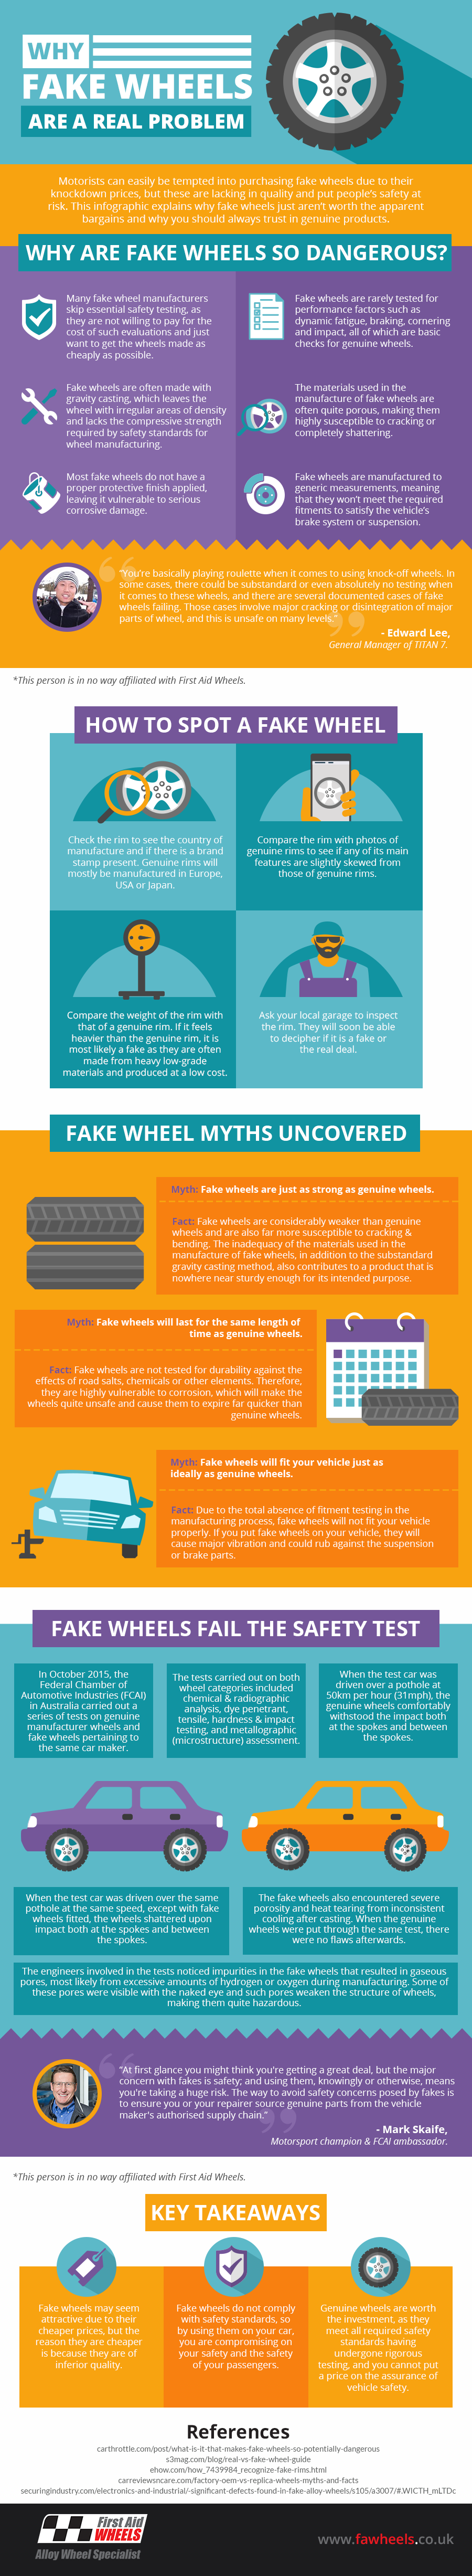 Why-Fake-Wheels-are-a-Real-Problem-Infographic